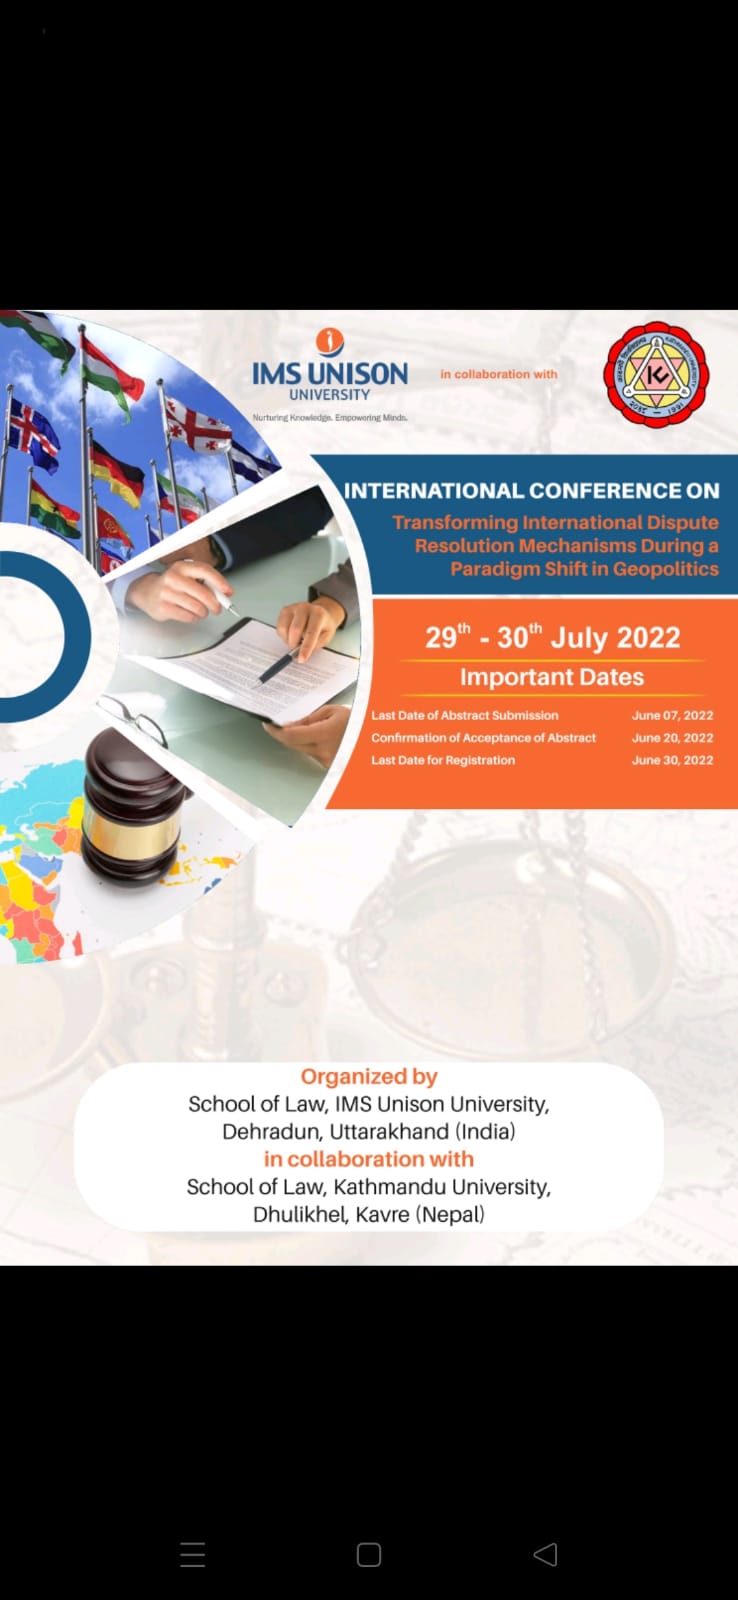  International Conference on the theme “Transforming International Dispute Resolution Mechanisms During a Paradigm Shift in Geopolitics” by IMS Unison University